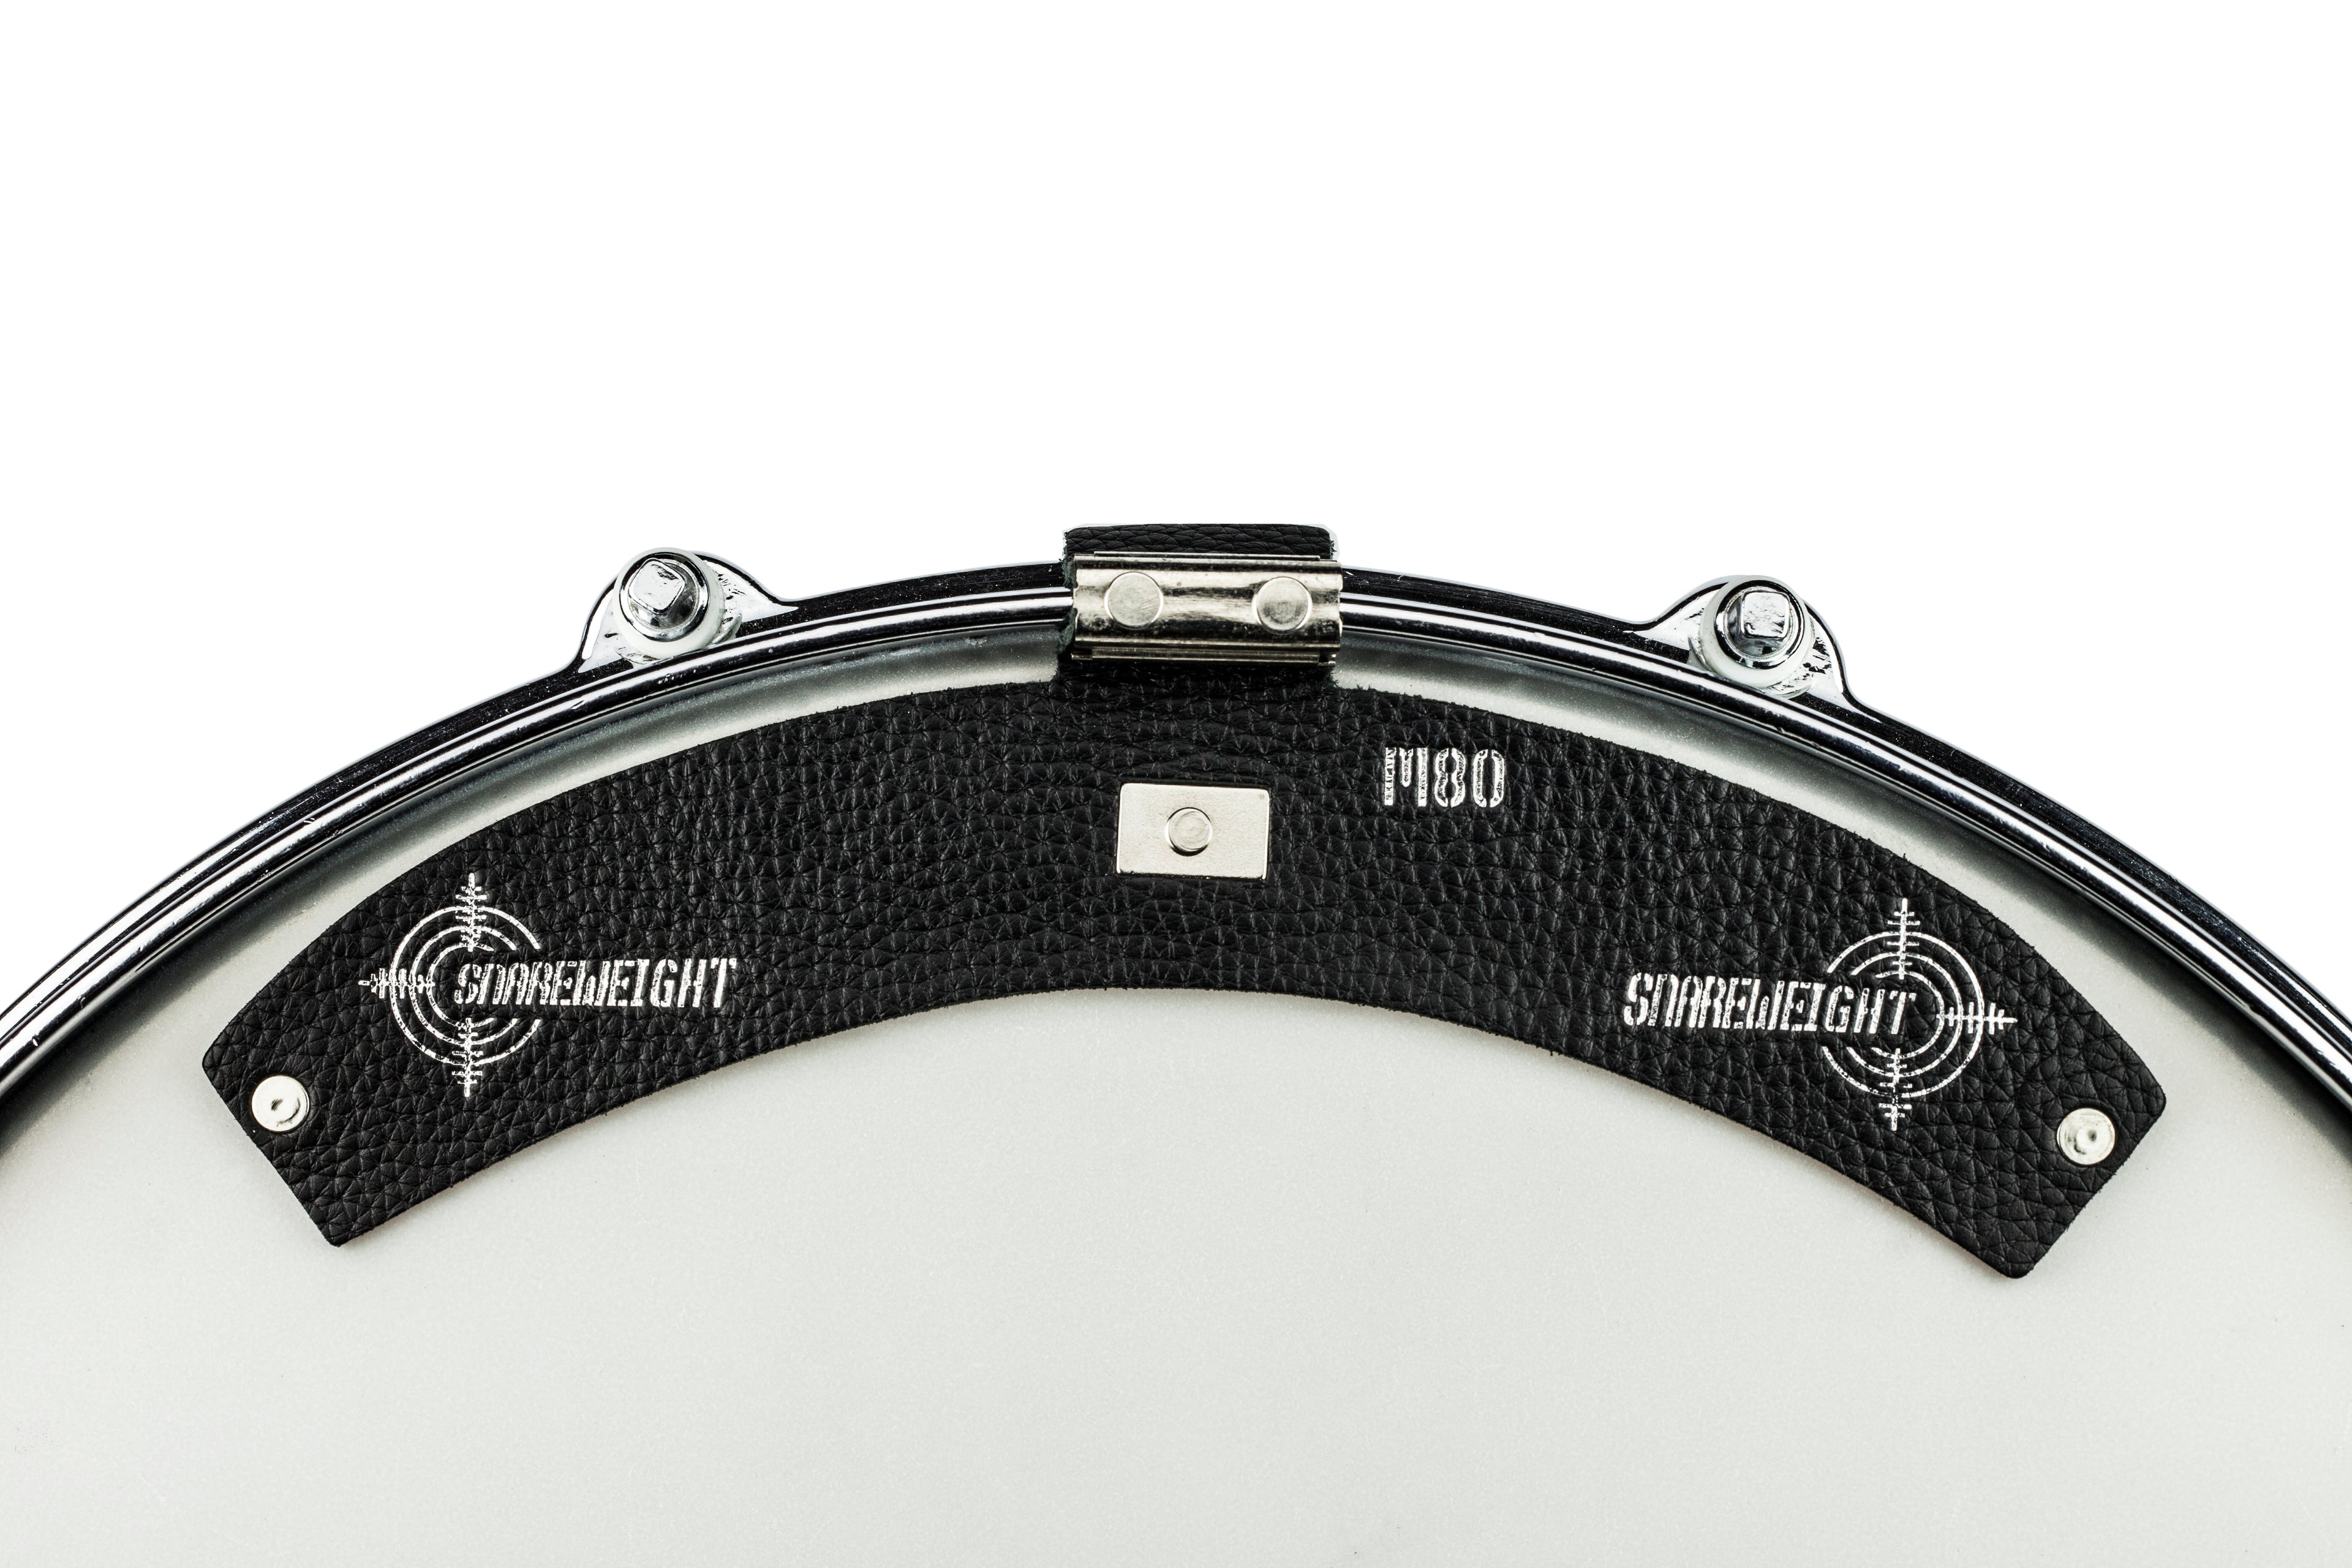 Load video: Product review by 180 drums